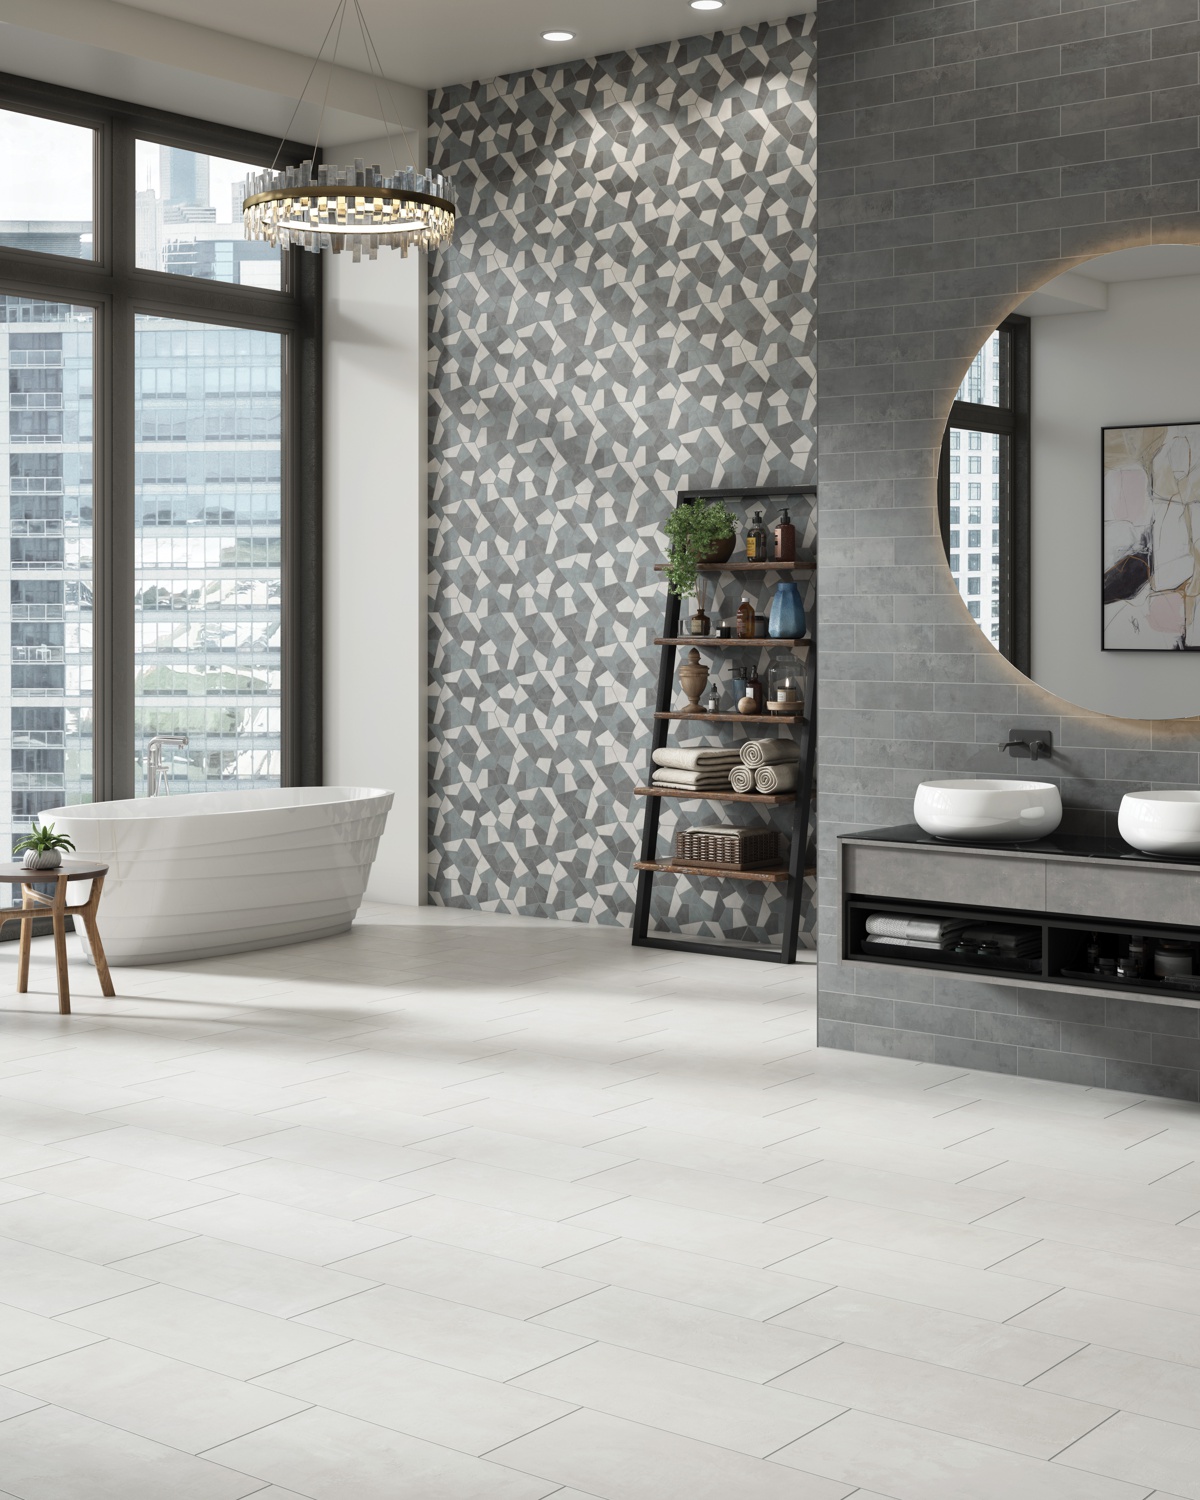 Find Perfect Tiles - View Our Selection of Tiles